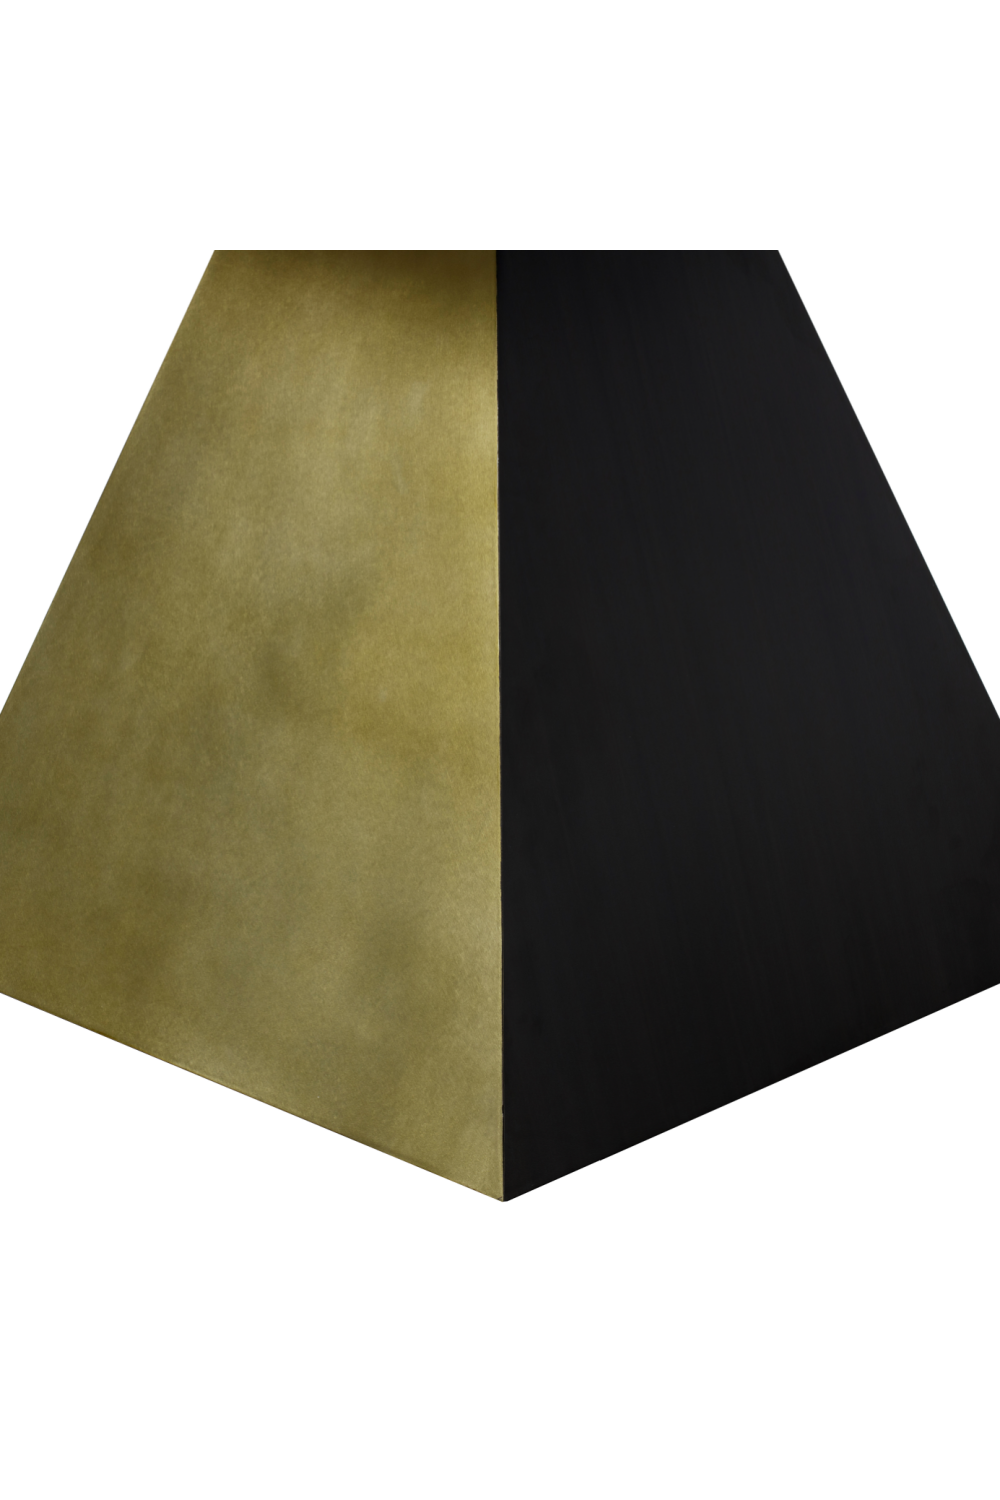 Black Marble Pyramid Base Dining Table L | Andrew Martin Louis | OROA